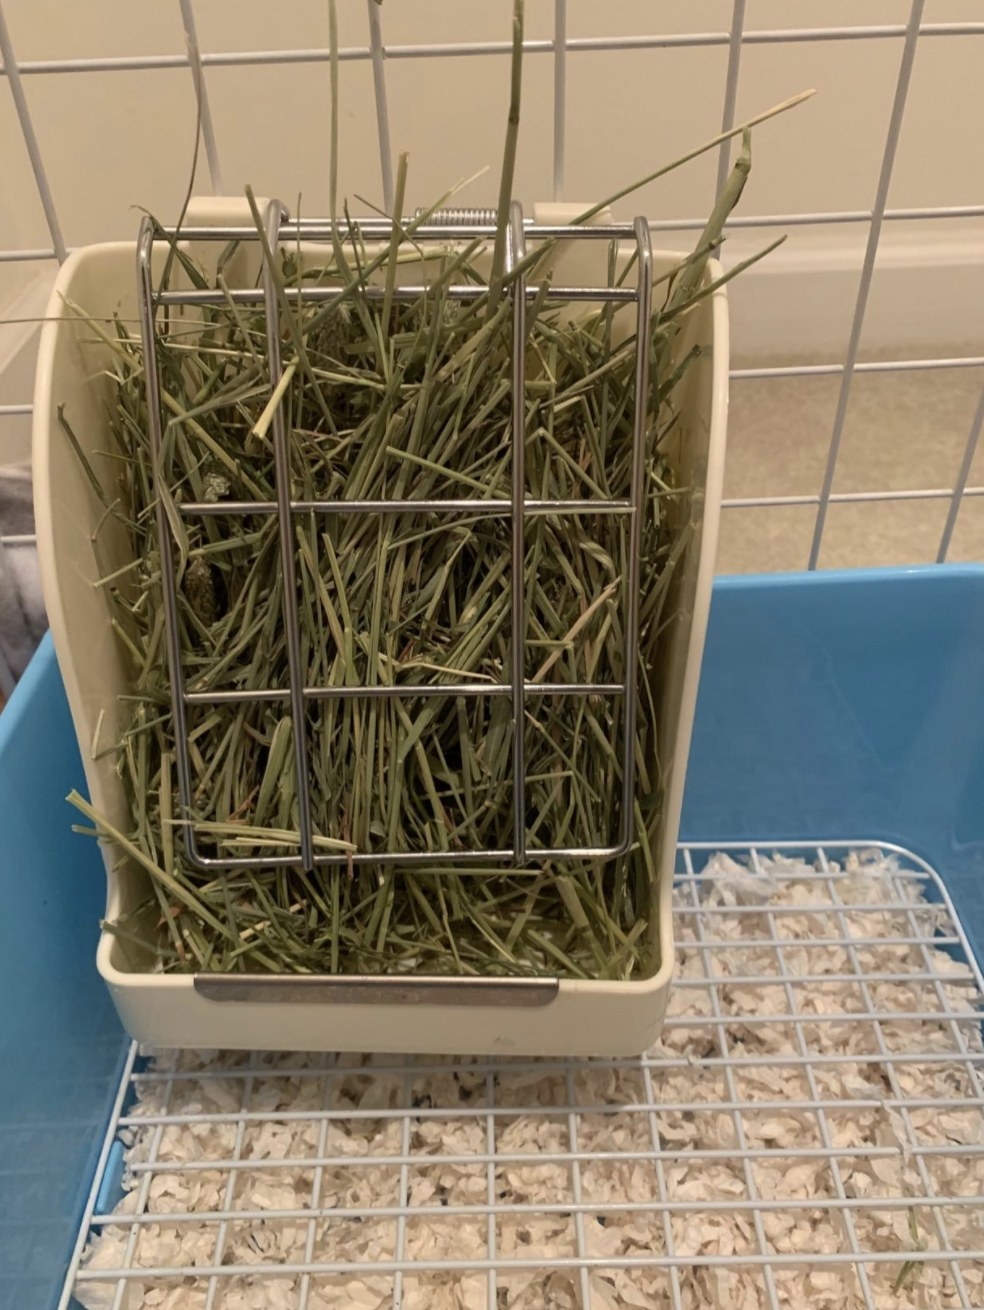 An image of a hay feeder in a cage